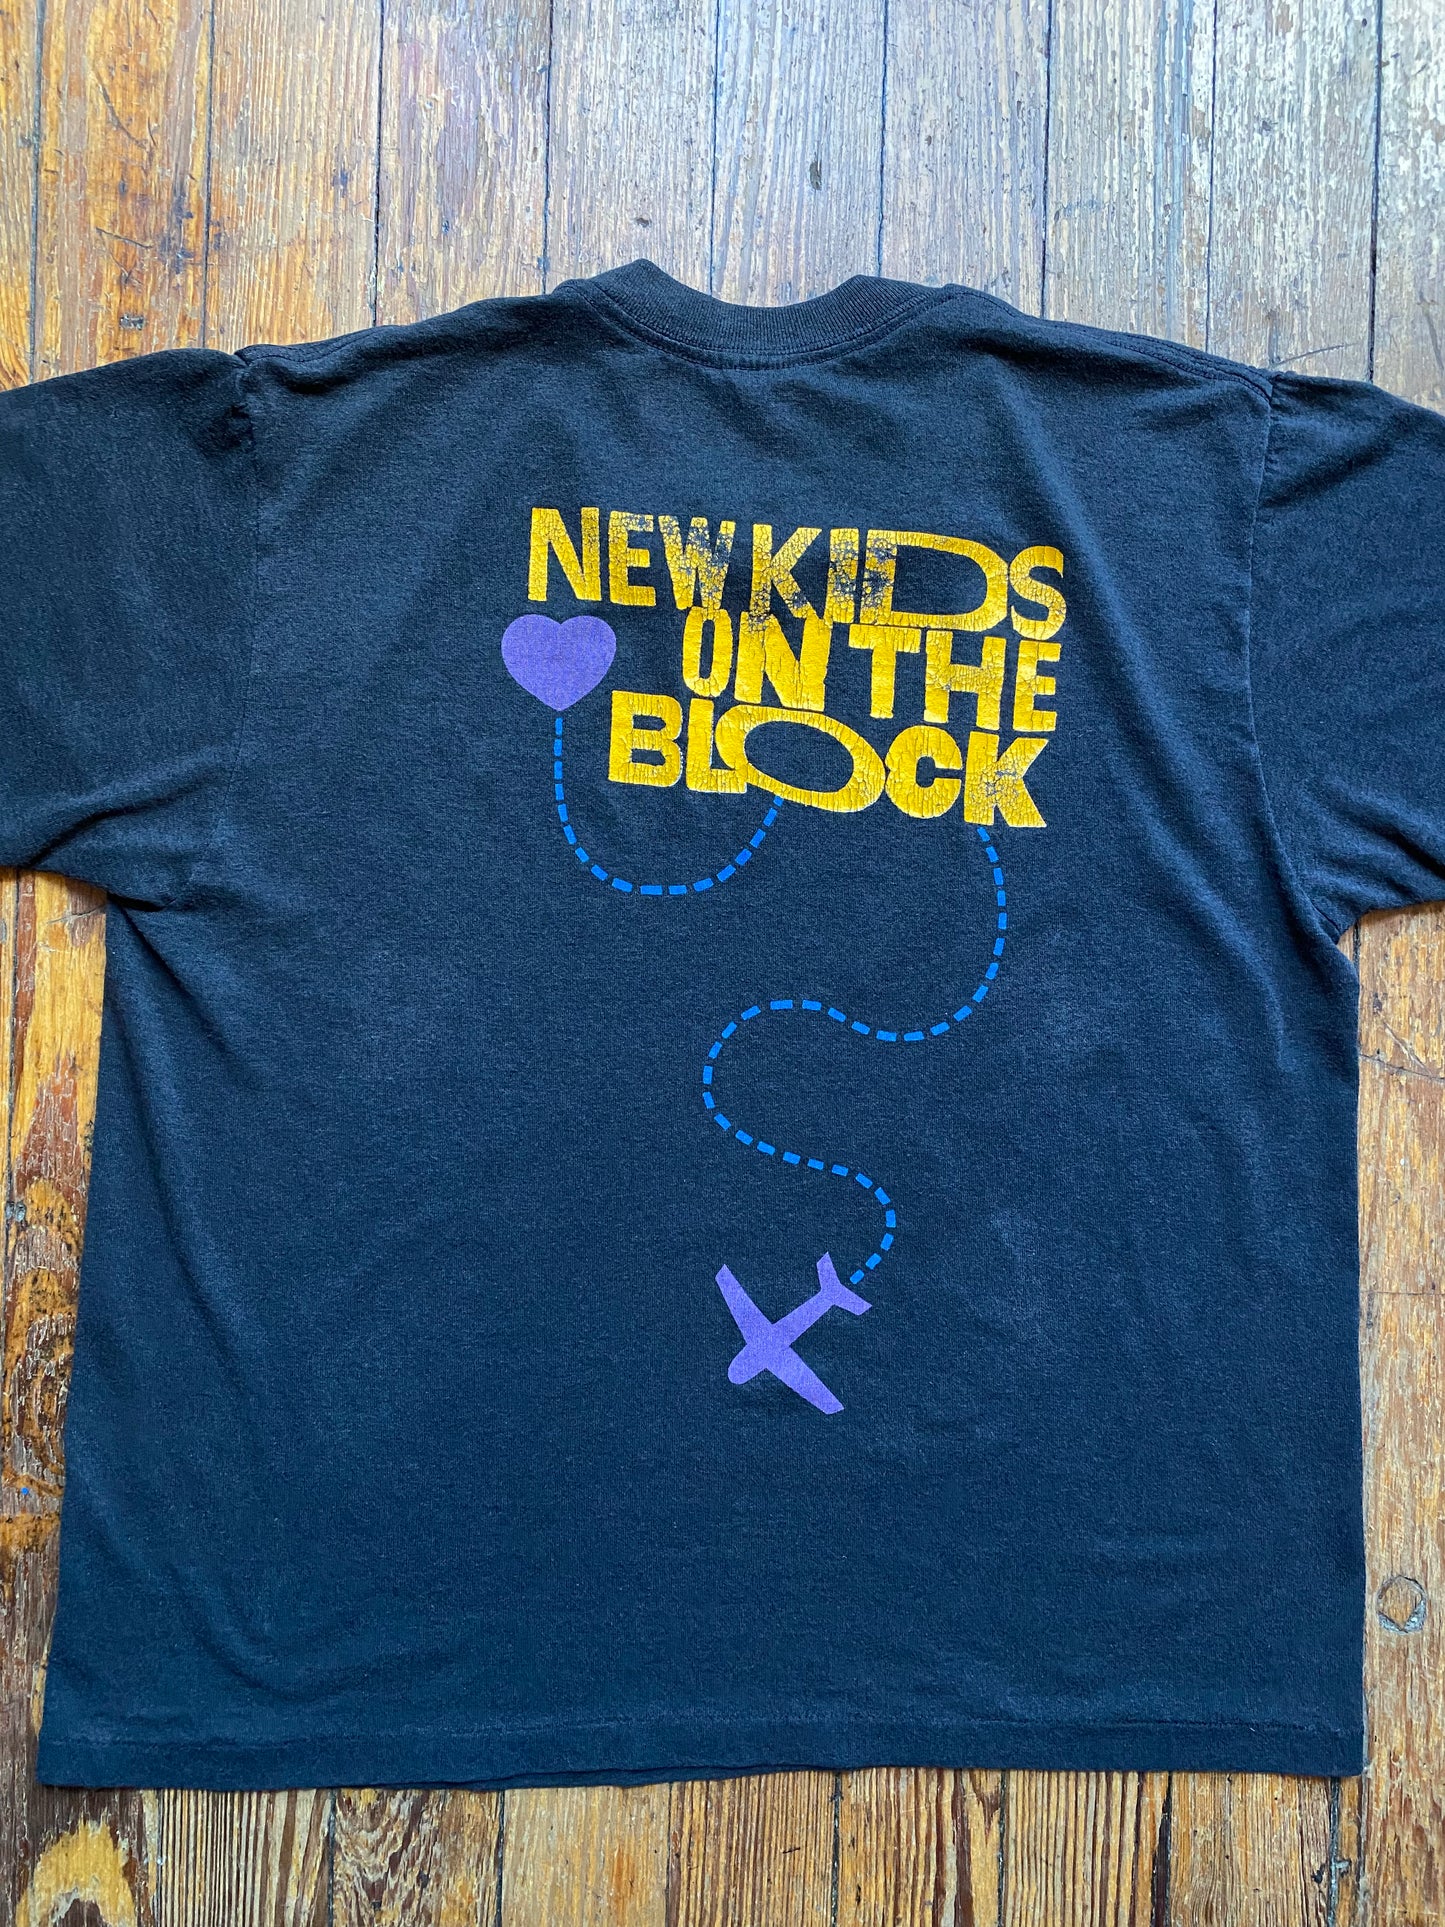 Vintage 80’s New Kids on the Block T-Shirt